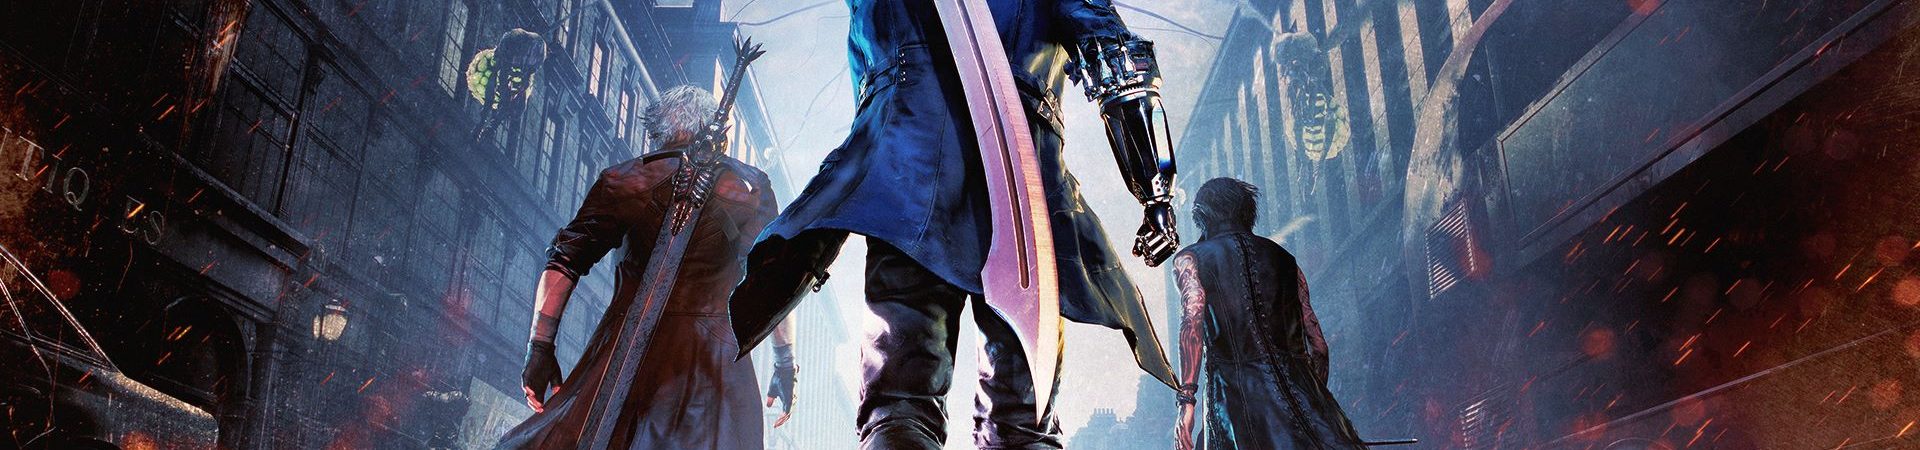 Devil May Cry 5 – Preview